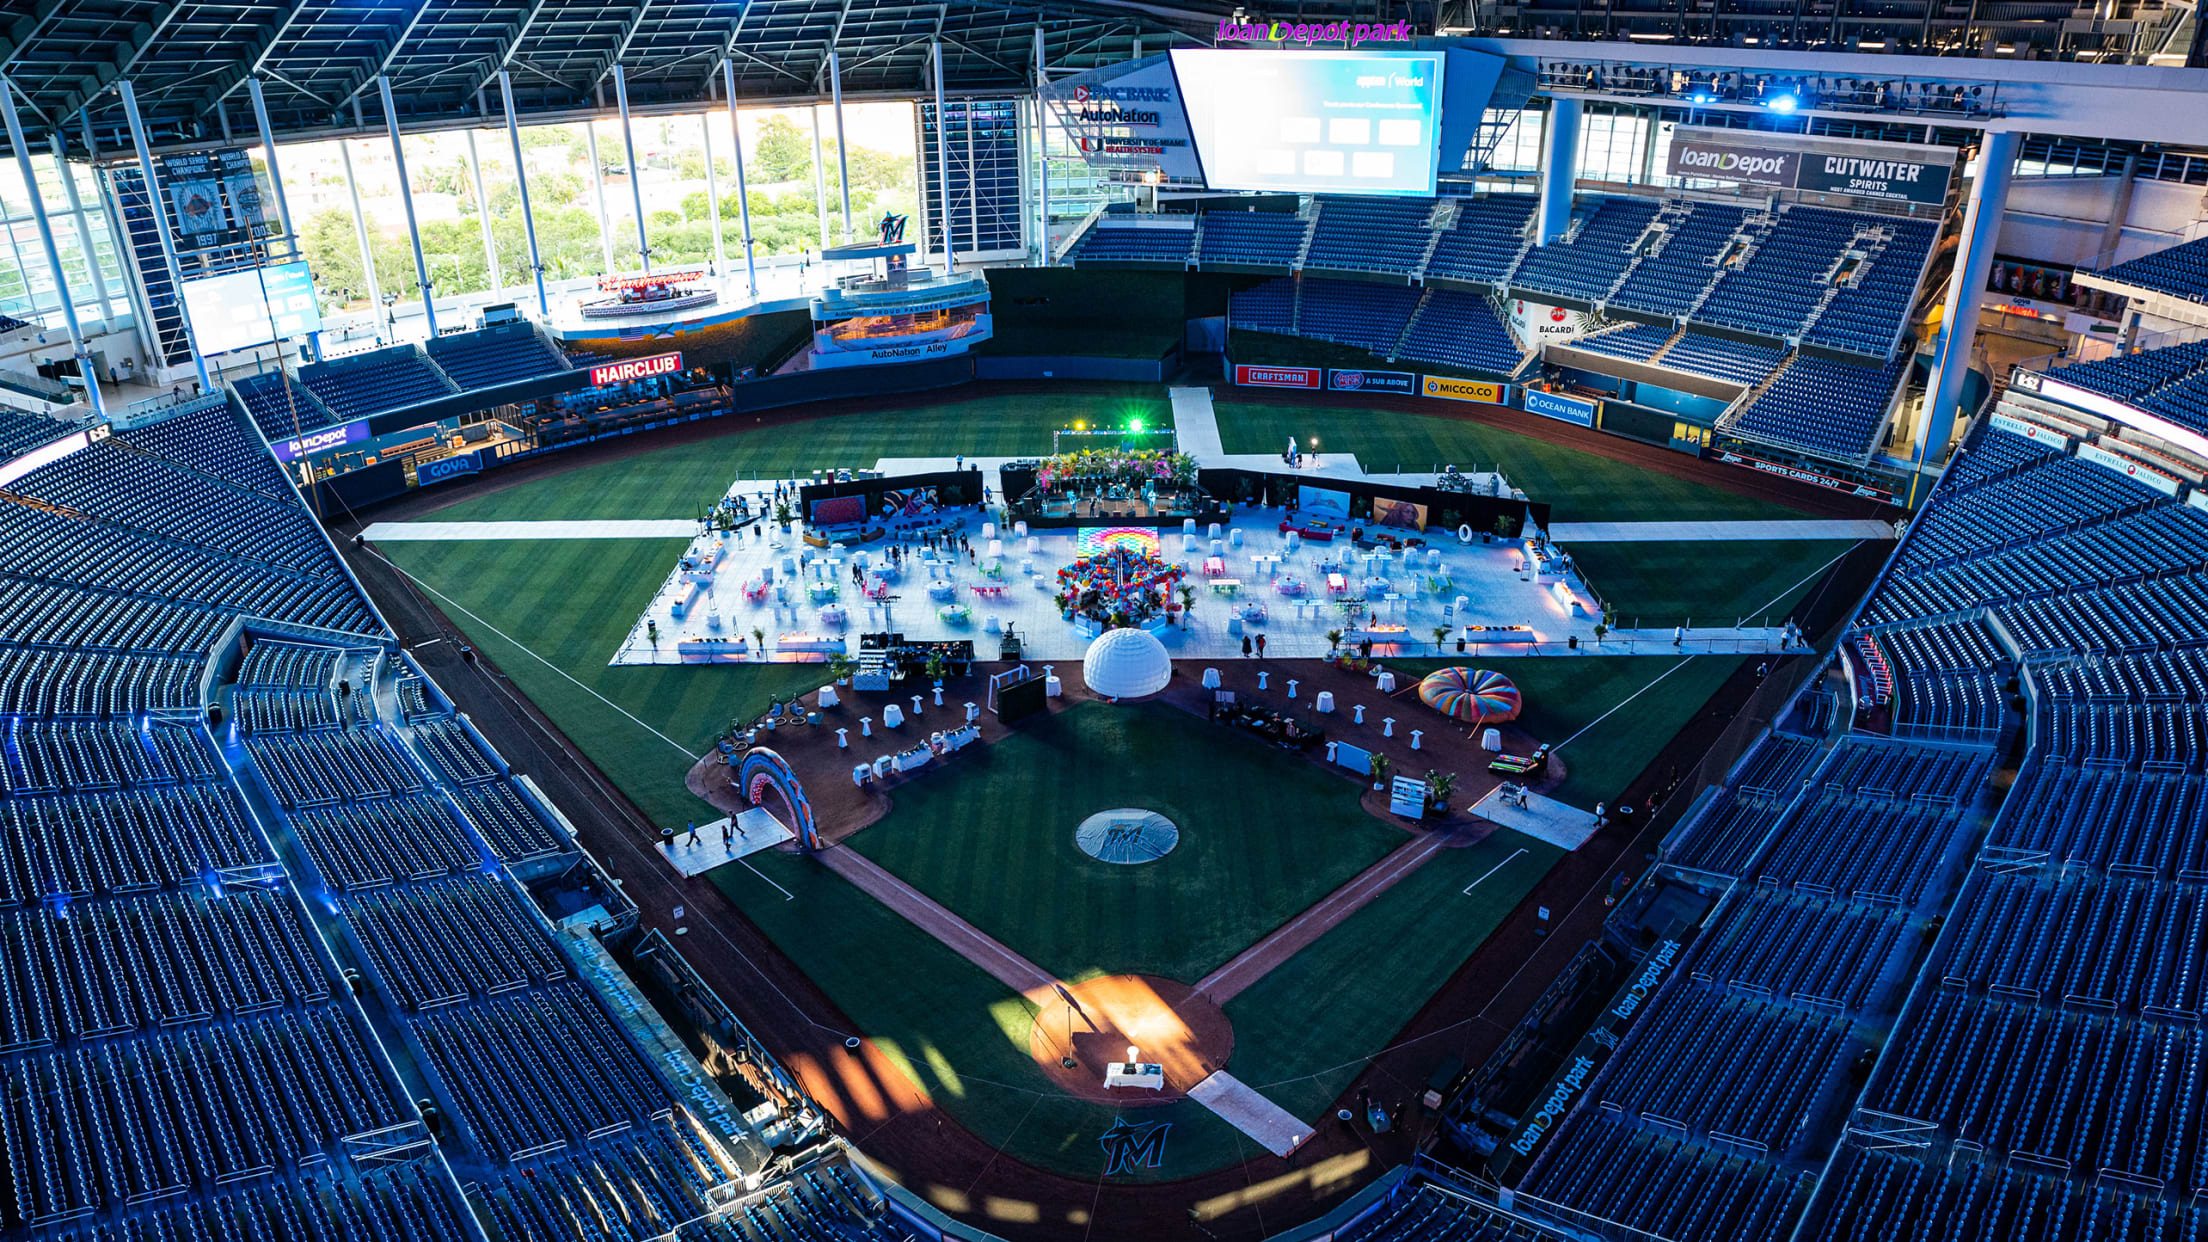 Marlins officially unveil LoanDepot Park as new venue name